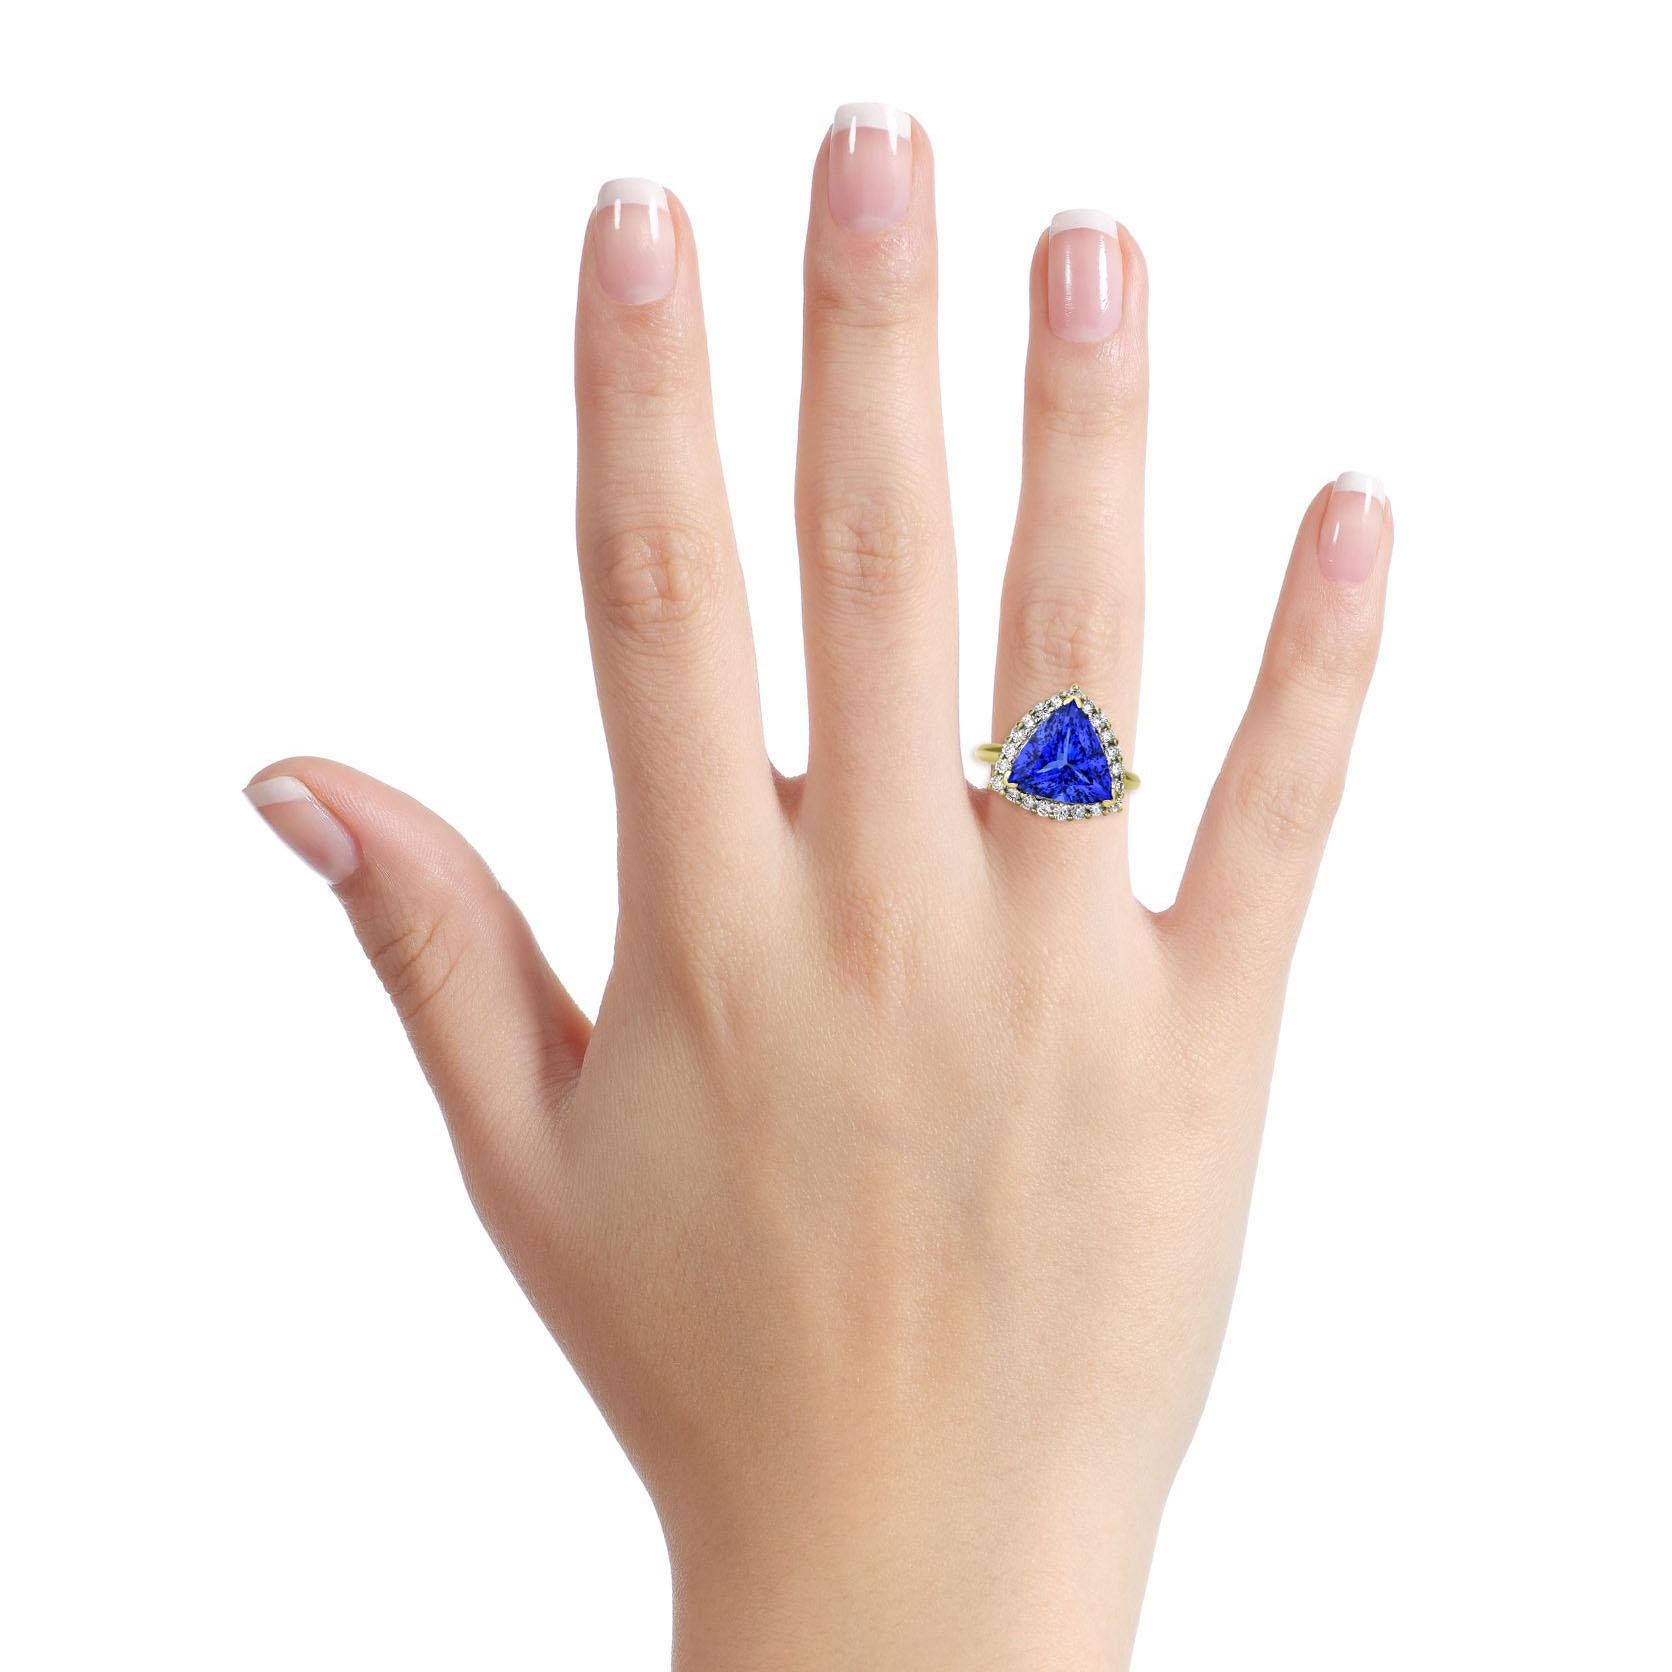 Tanzanite and Diamond ring in 14-karat yellow gold. The polished metal setting has a trillion cut natural Tanzanite center surrounded by 21 brilliant round diamonds. Comes with appraisal. Replacement value $12,000. 

Size, 6.25
Height, 16mm
Width,